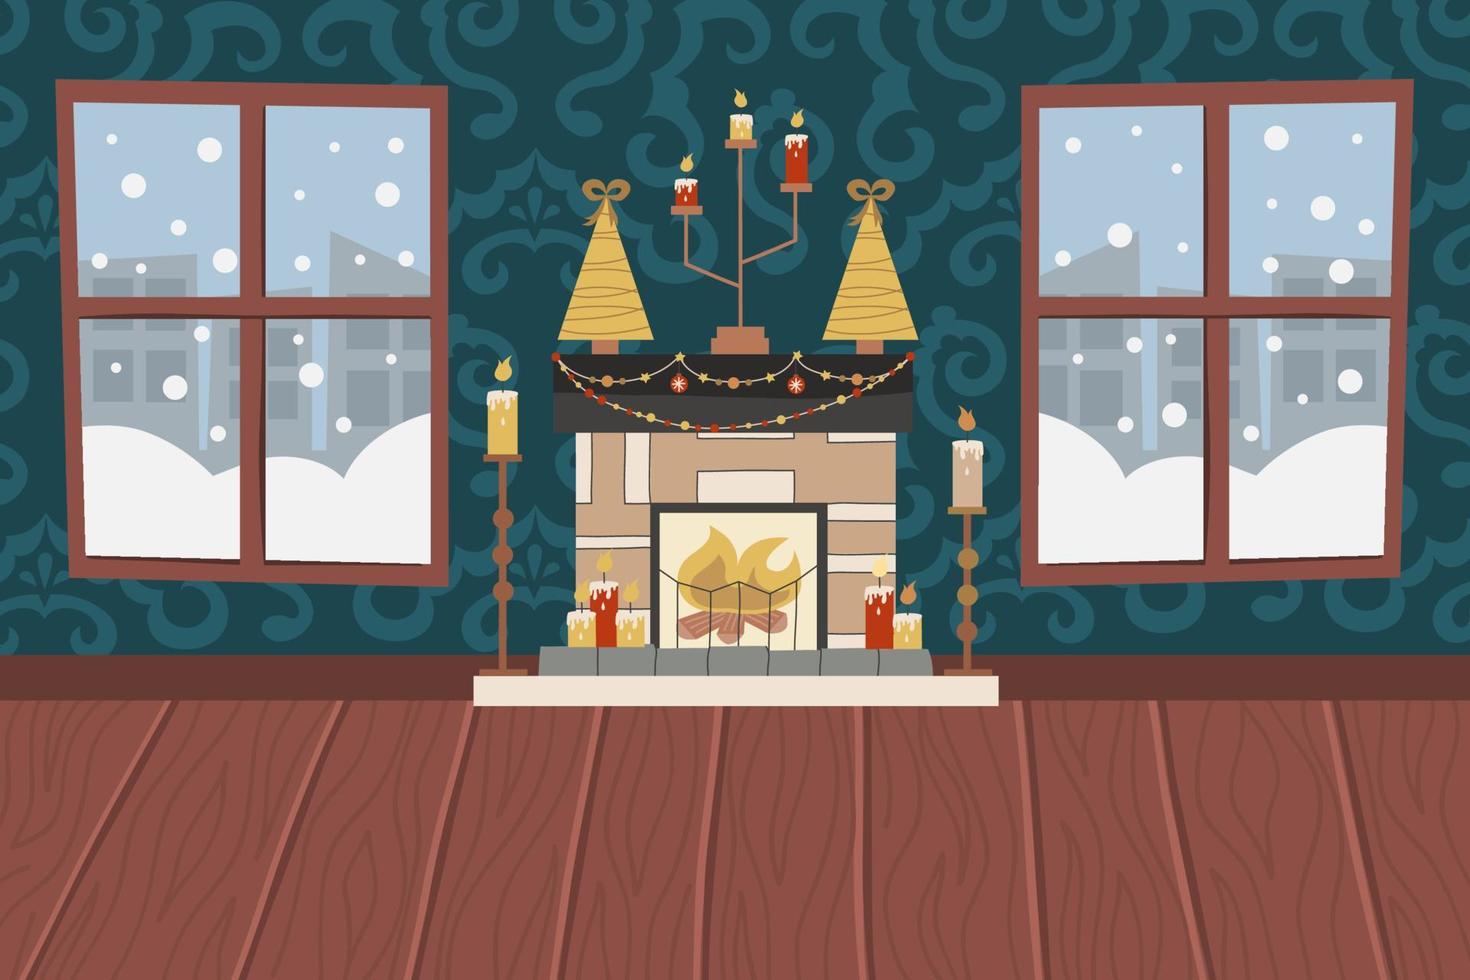 Christmas living room with fireplace, wooden floor, patterned wallpaper and snowy windows.Fireplace with candles, garlands and golden Christmas trees. Vector illustration for a festive interior.